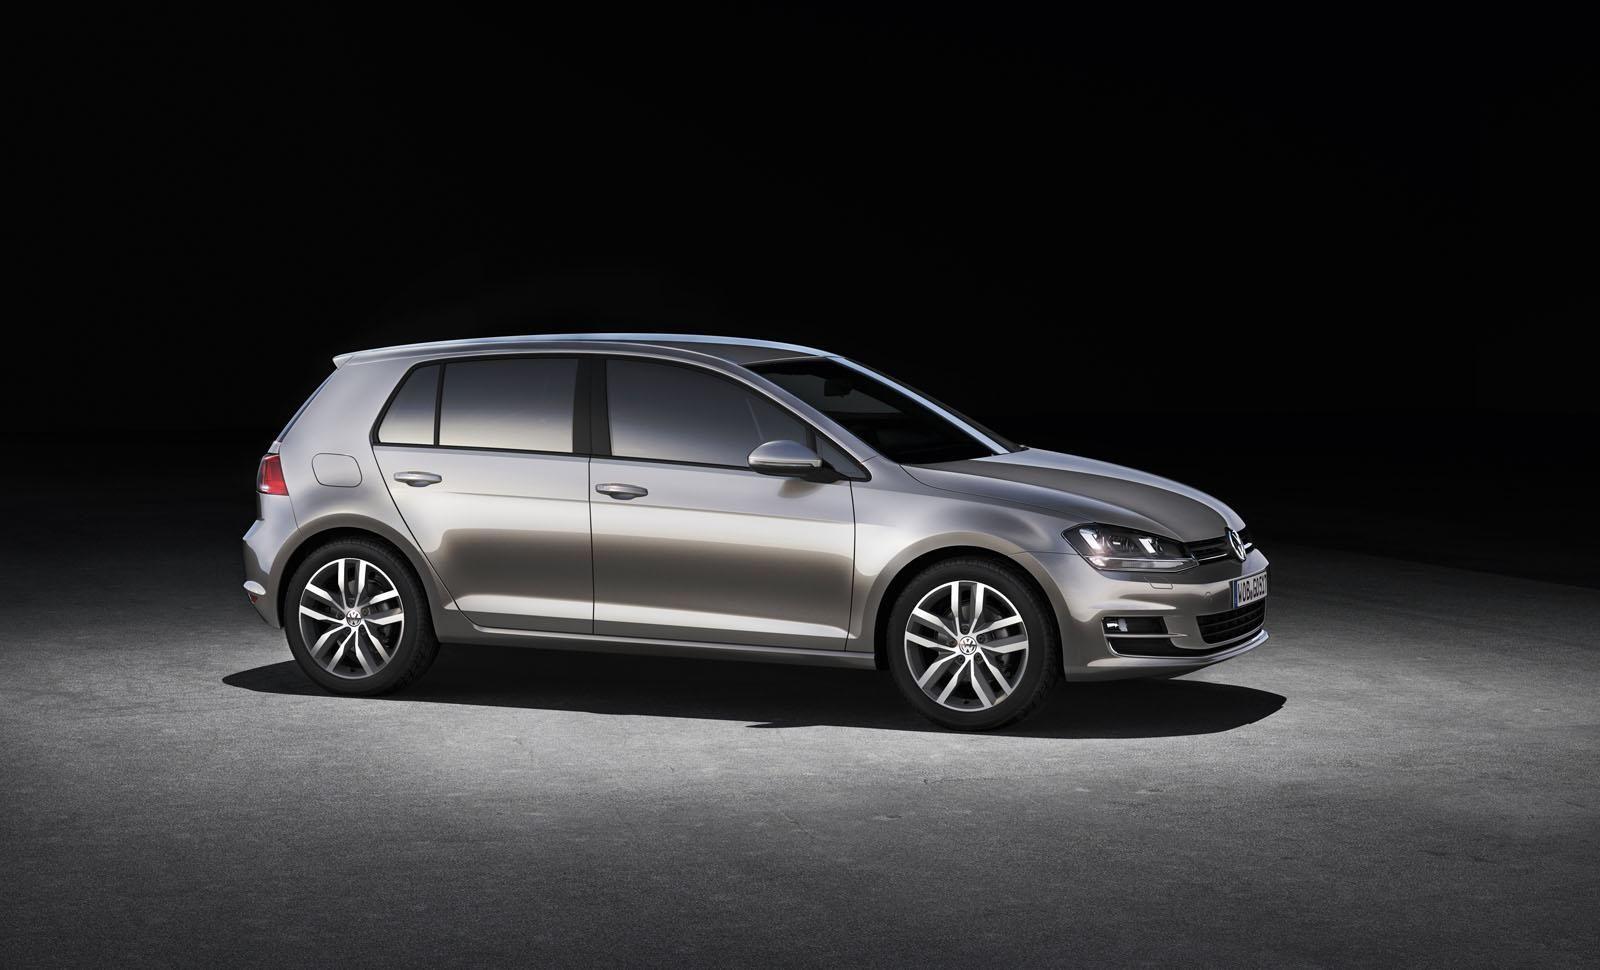 Volkswagen Golf VII Official Specs and Image Released